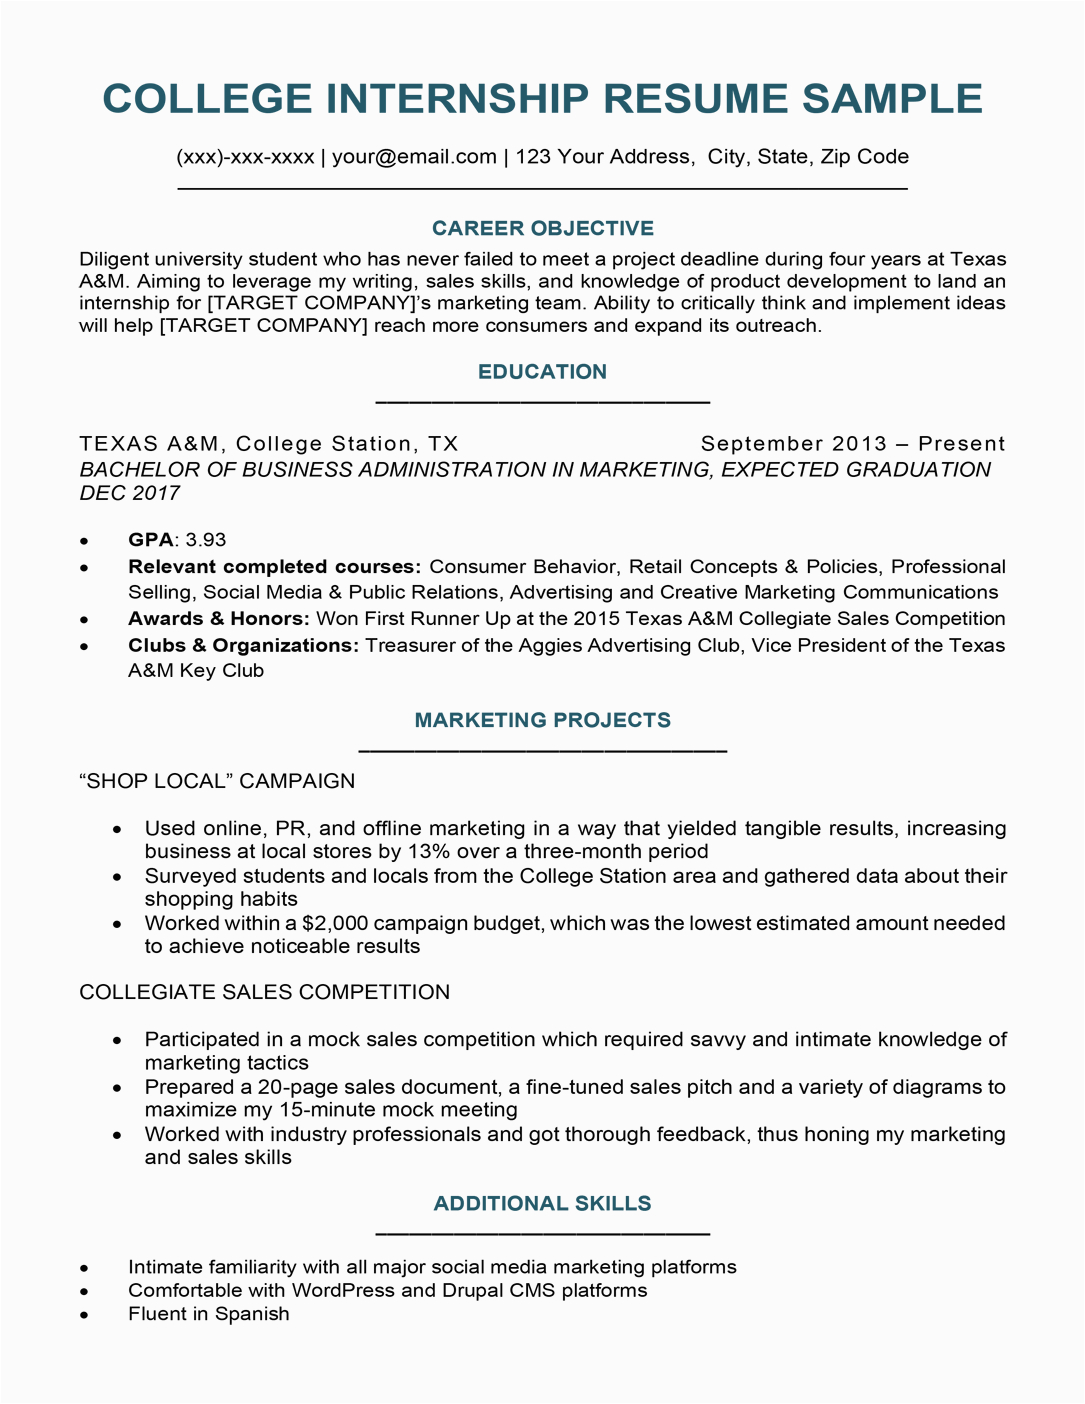 Sample Resume Profile for College Student College Student Resume Sample & Writing Tips